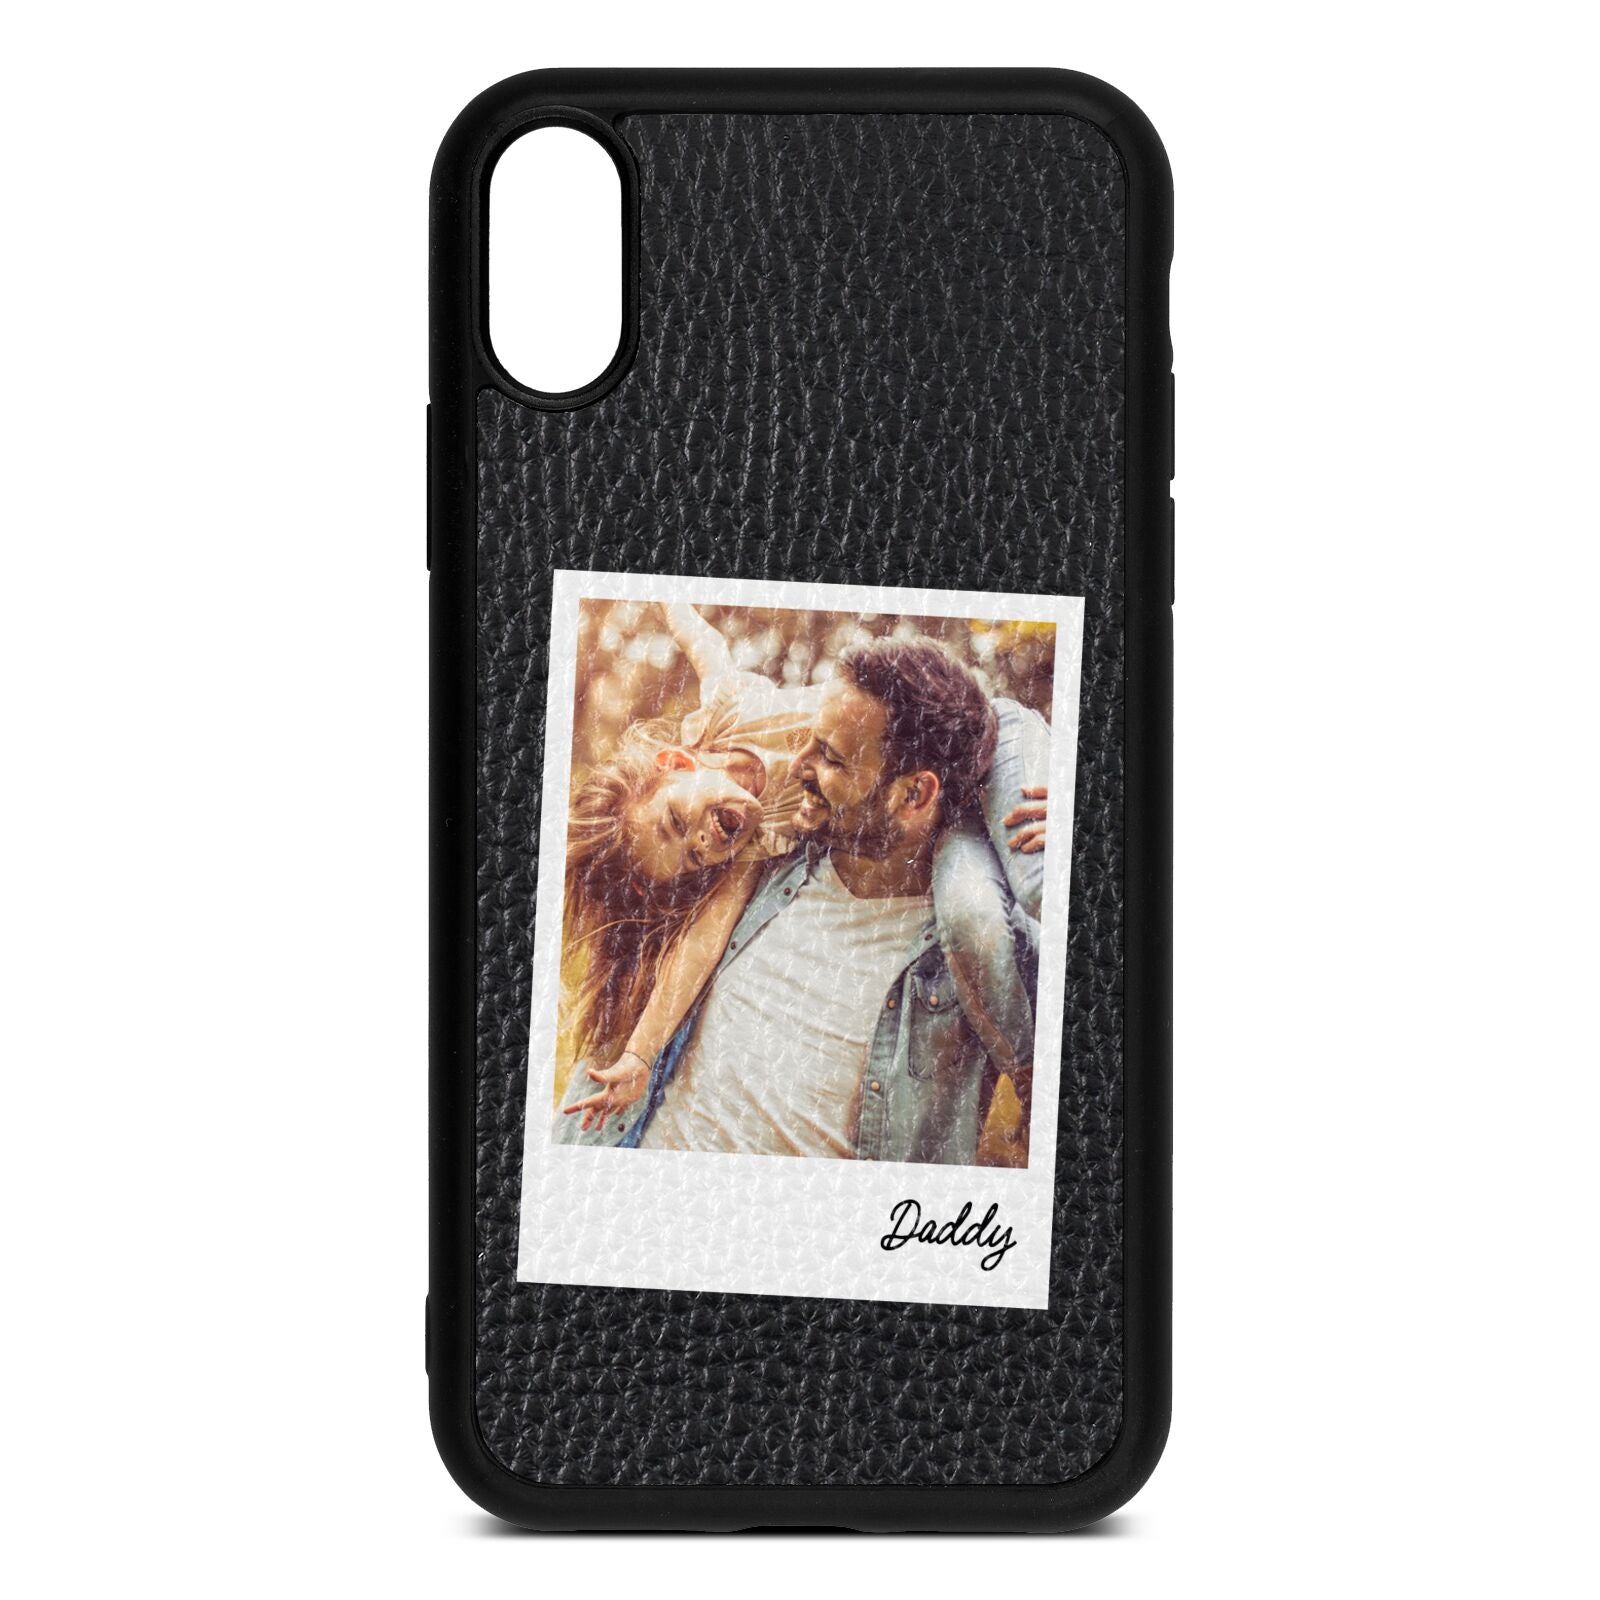 Fathers Day Photo Black Pebble Leather iPhone Xr Case